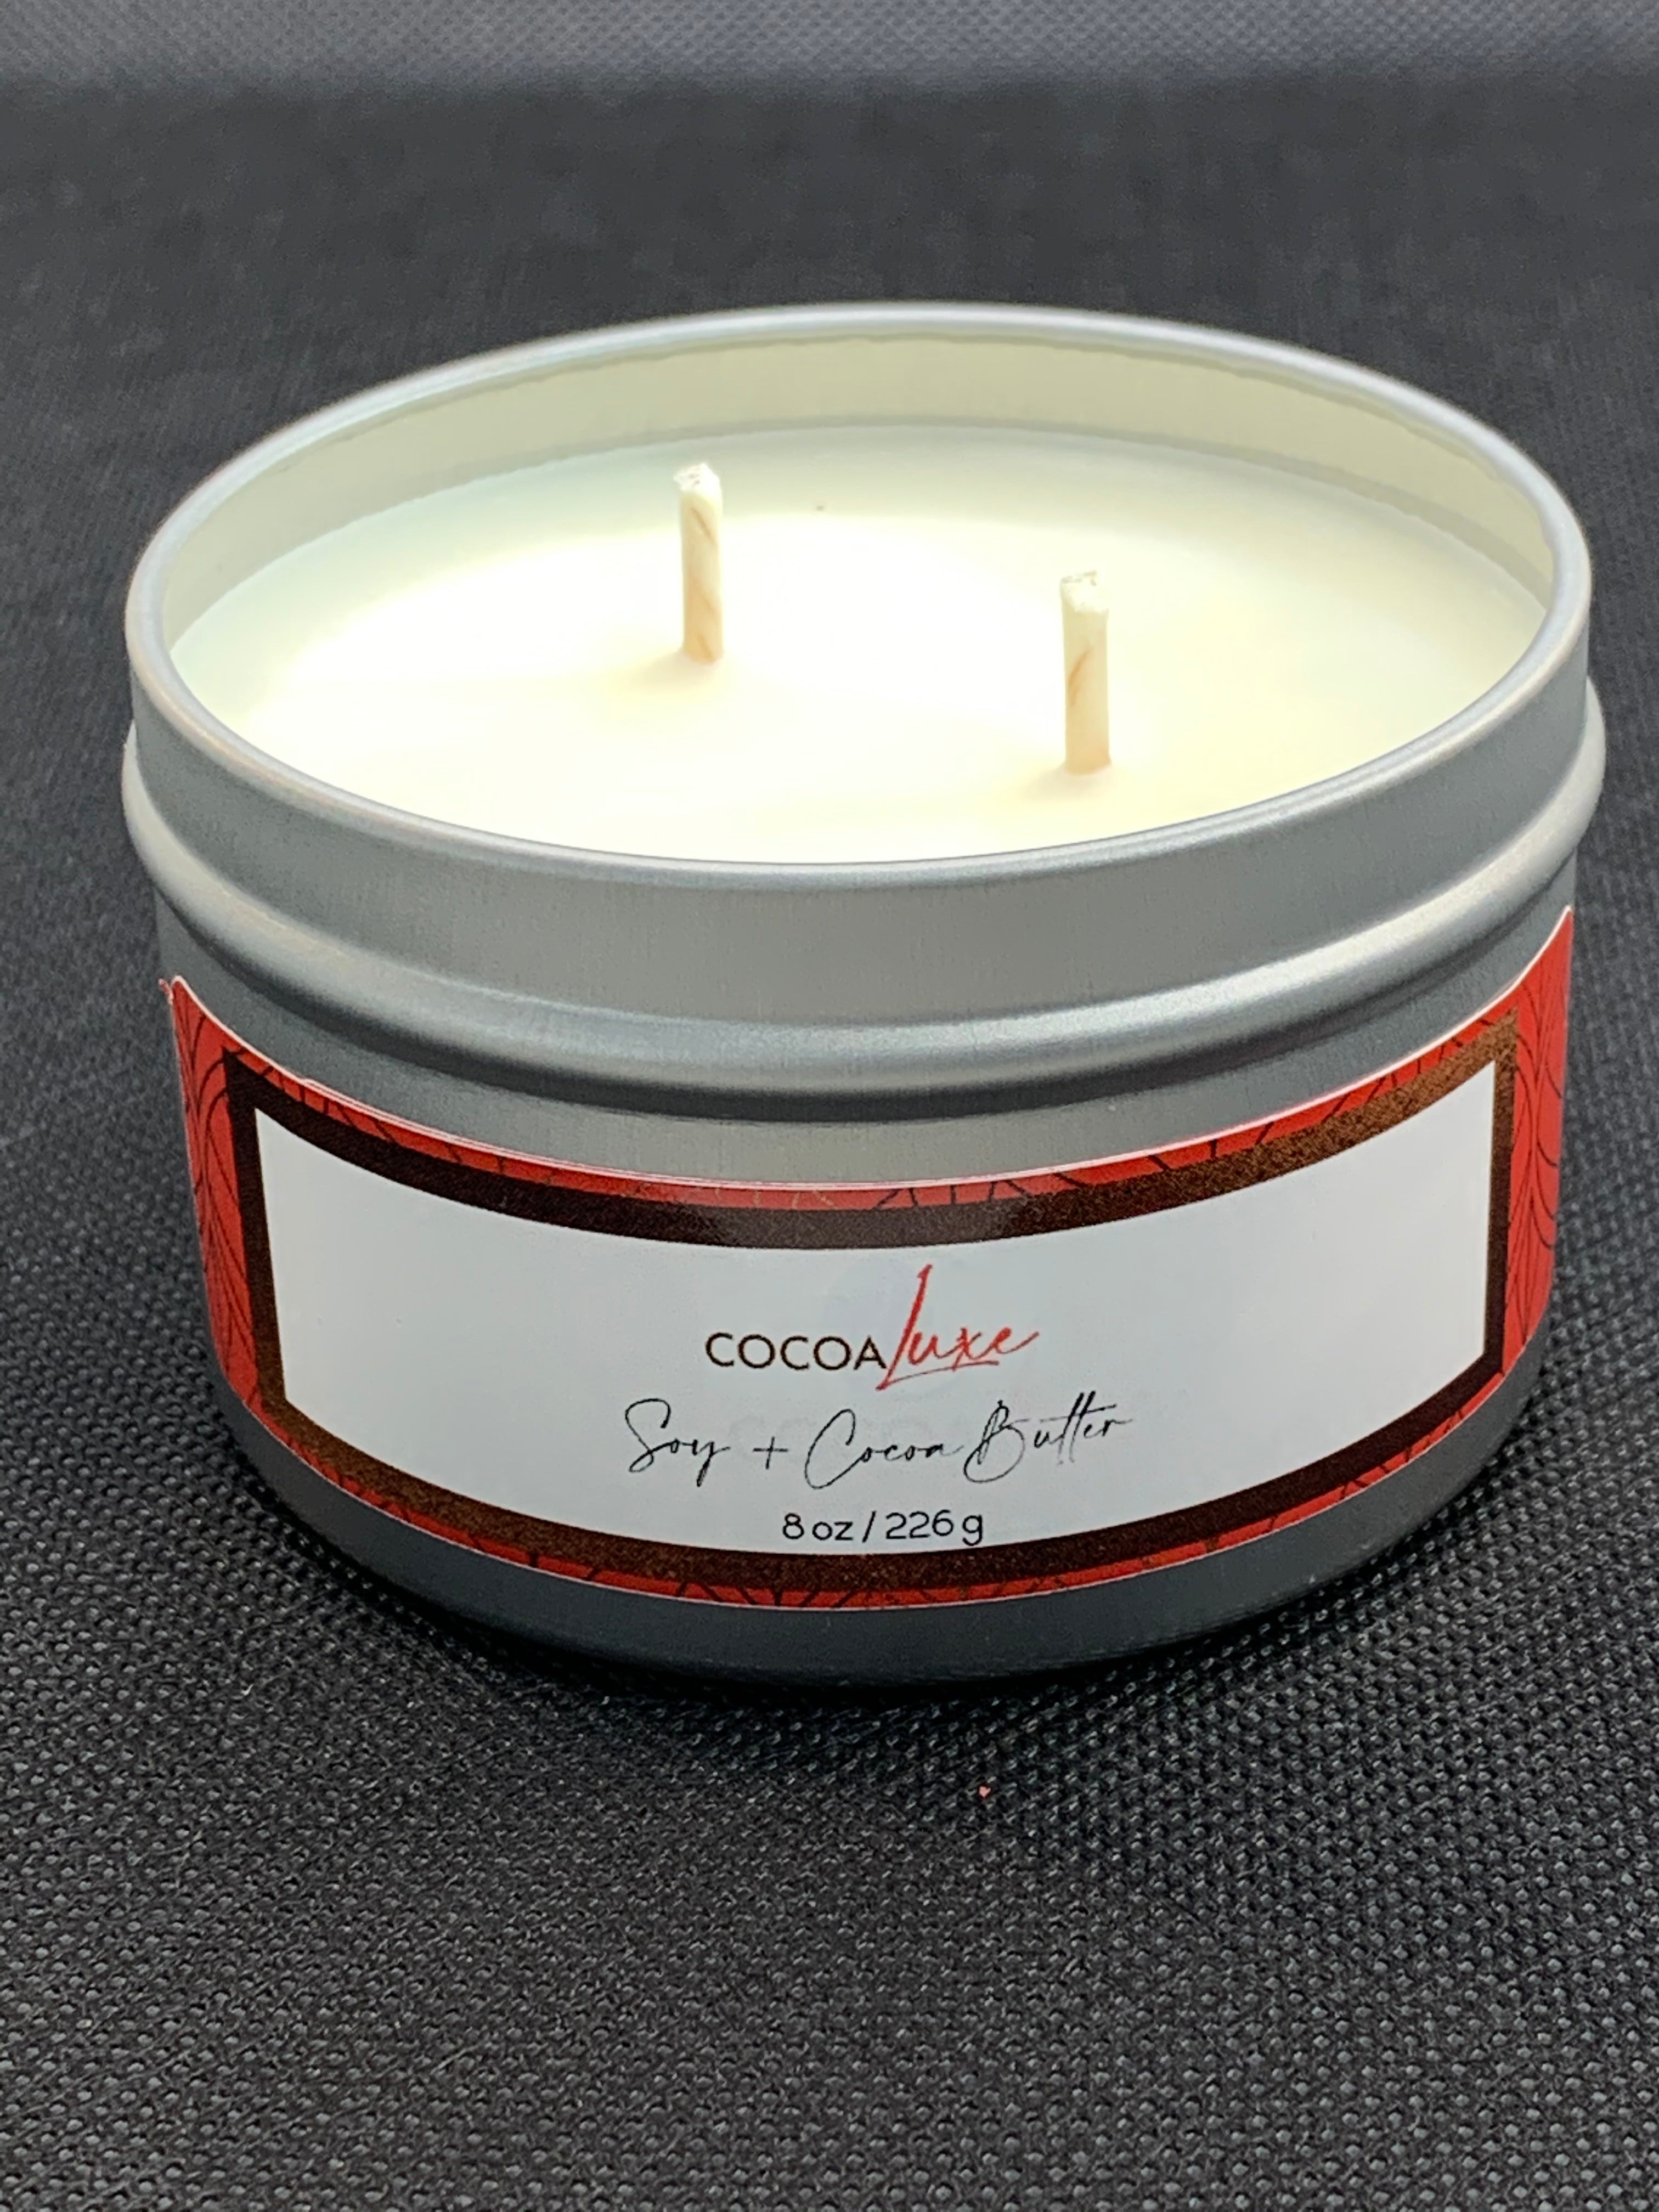 Soy + Cocoa Butter Candle - 8oz.